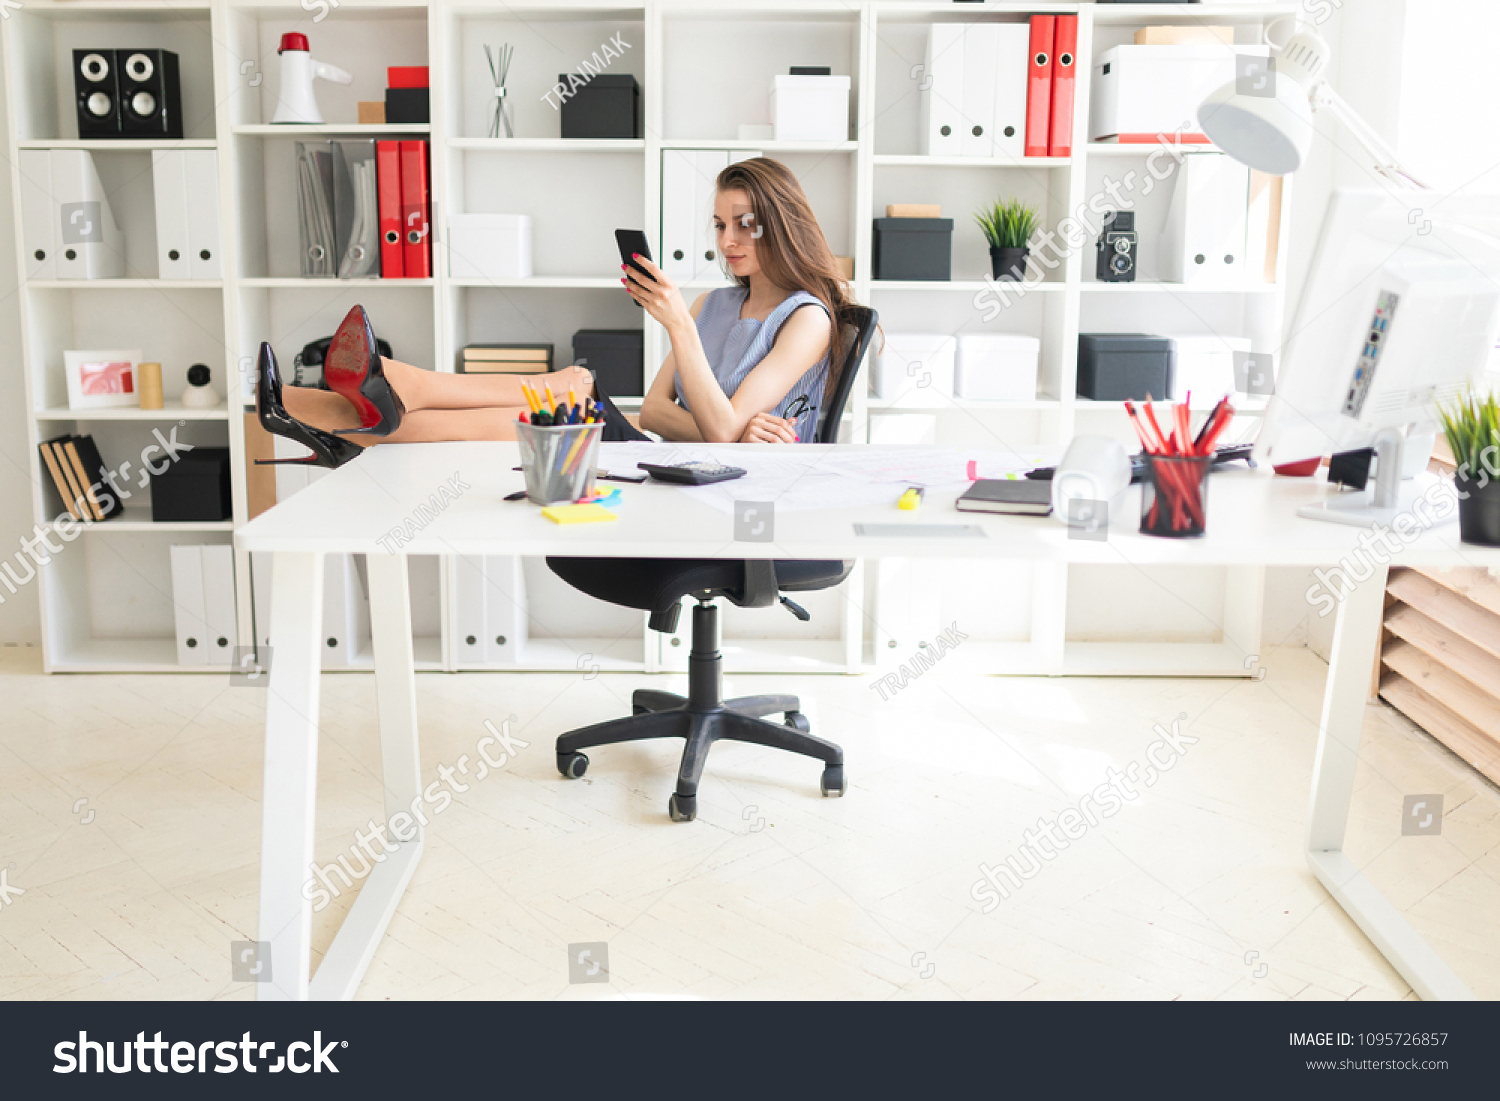 Beautiful Young Girl Office Has Put Stock Image Download Now